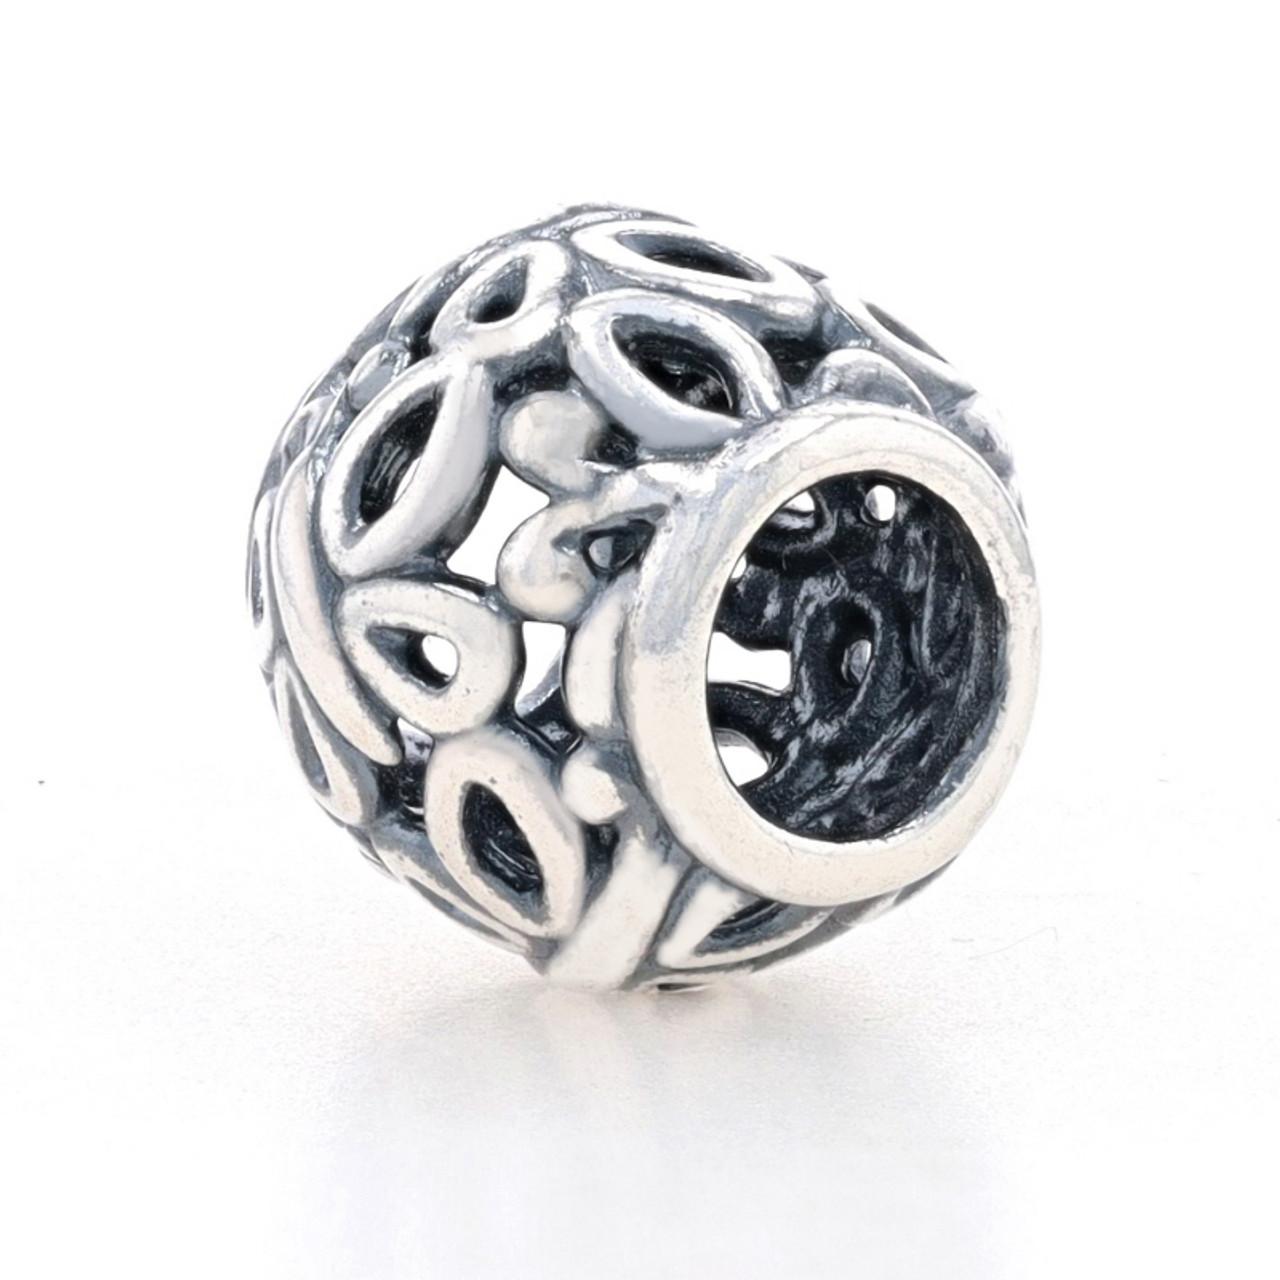 New Pandora Bead Charm Sterling Silver Butterfly Garden ALE 925

Additional information:
Material: Metal Sterling Silver
Brand: Pandora (new)
Number: 790895
Title: Butterfly Garden
Dimensions: 7/16